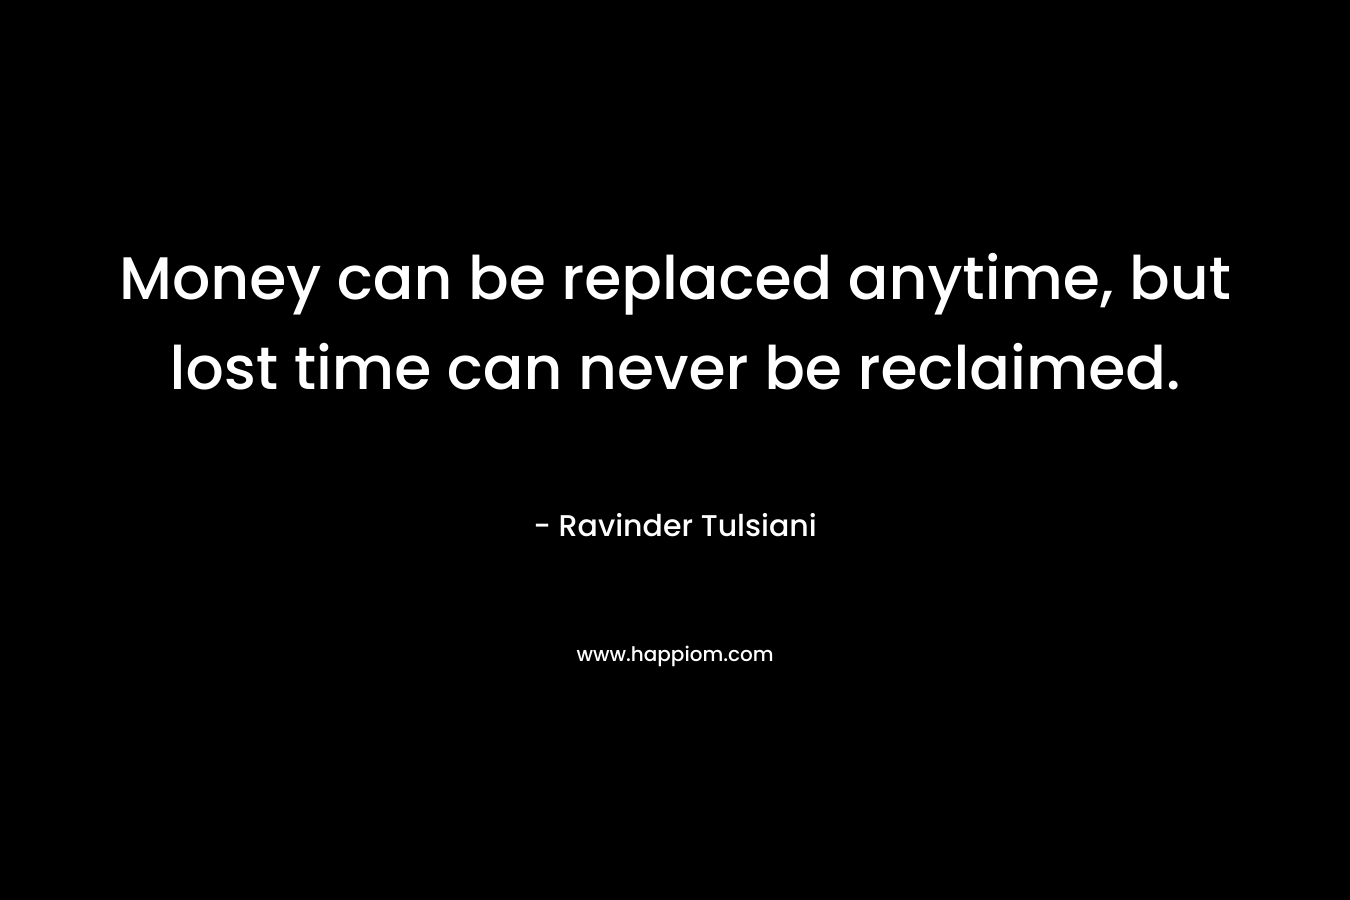 Money can be replaced anytime, but lost time can never be reclaimed. – Ravinder Tulsiani